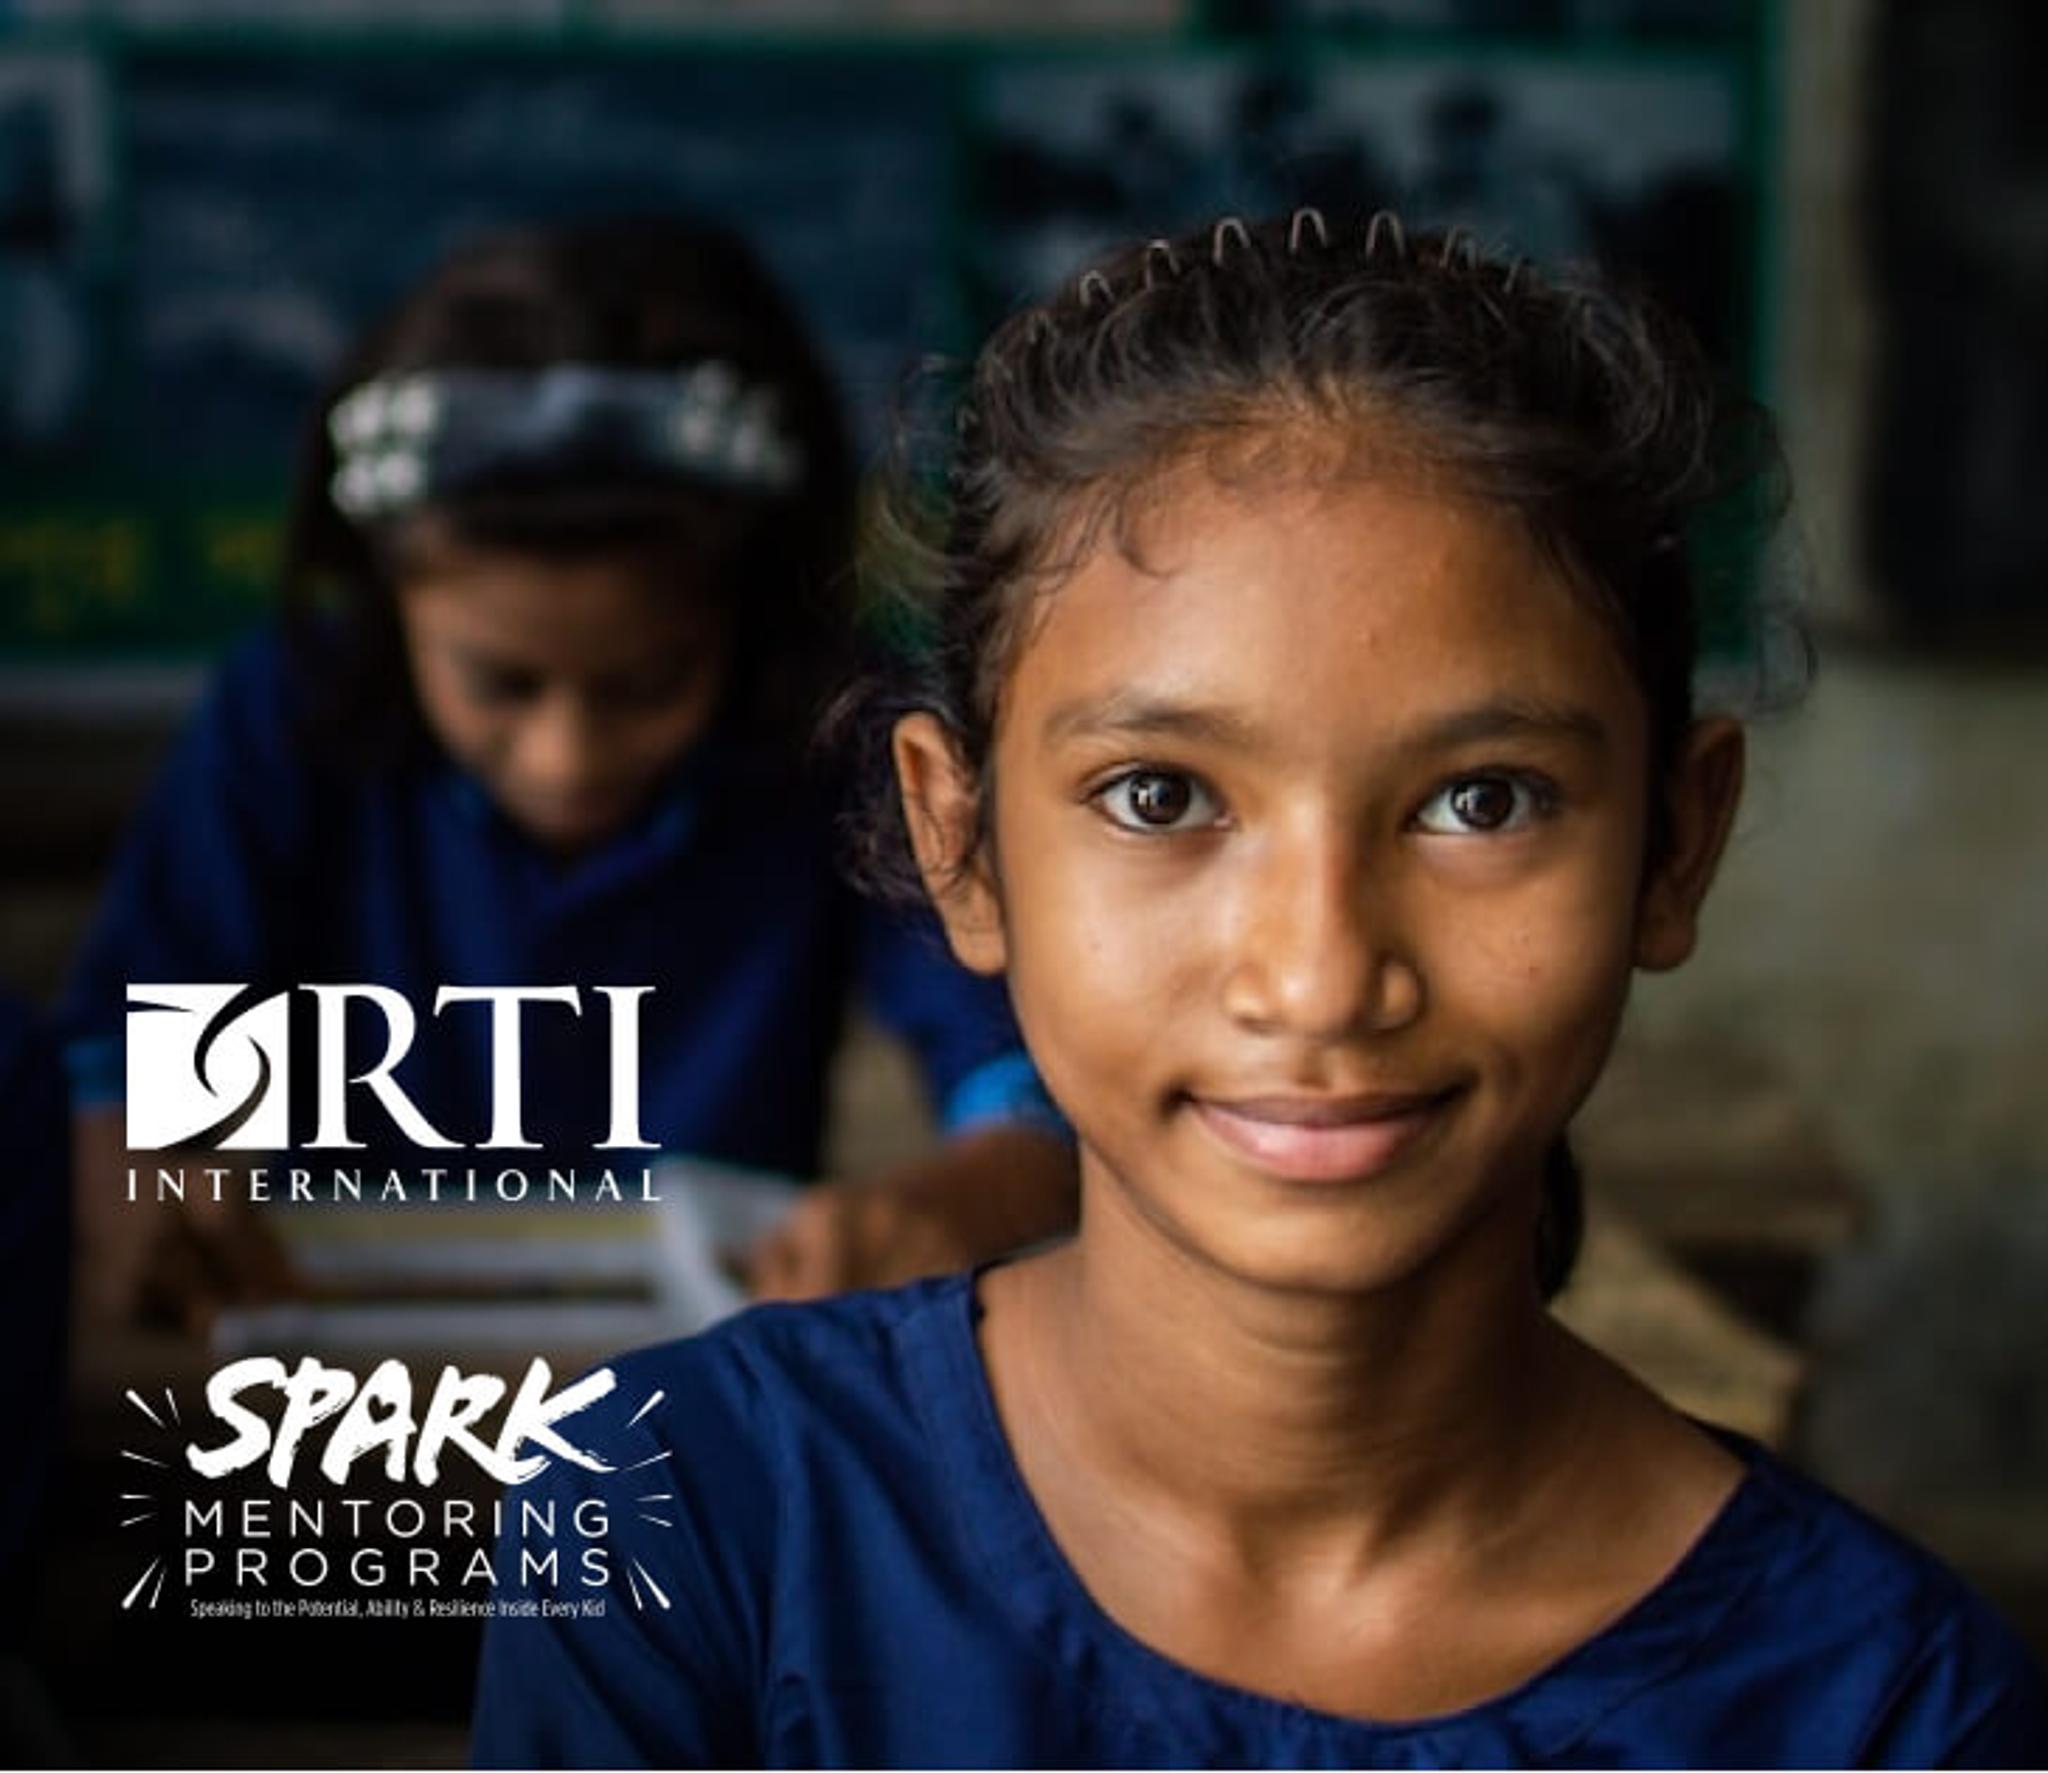 RTI and spark